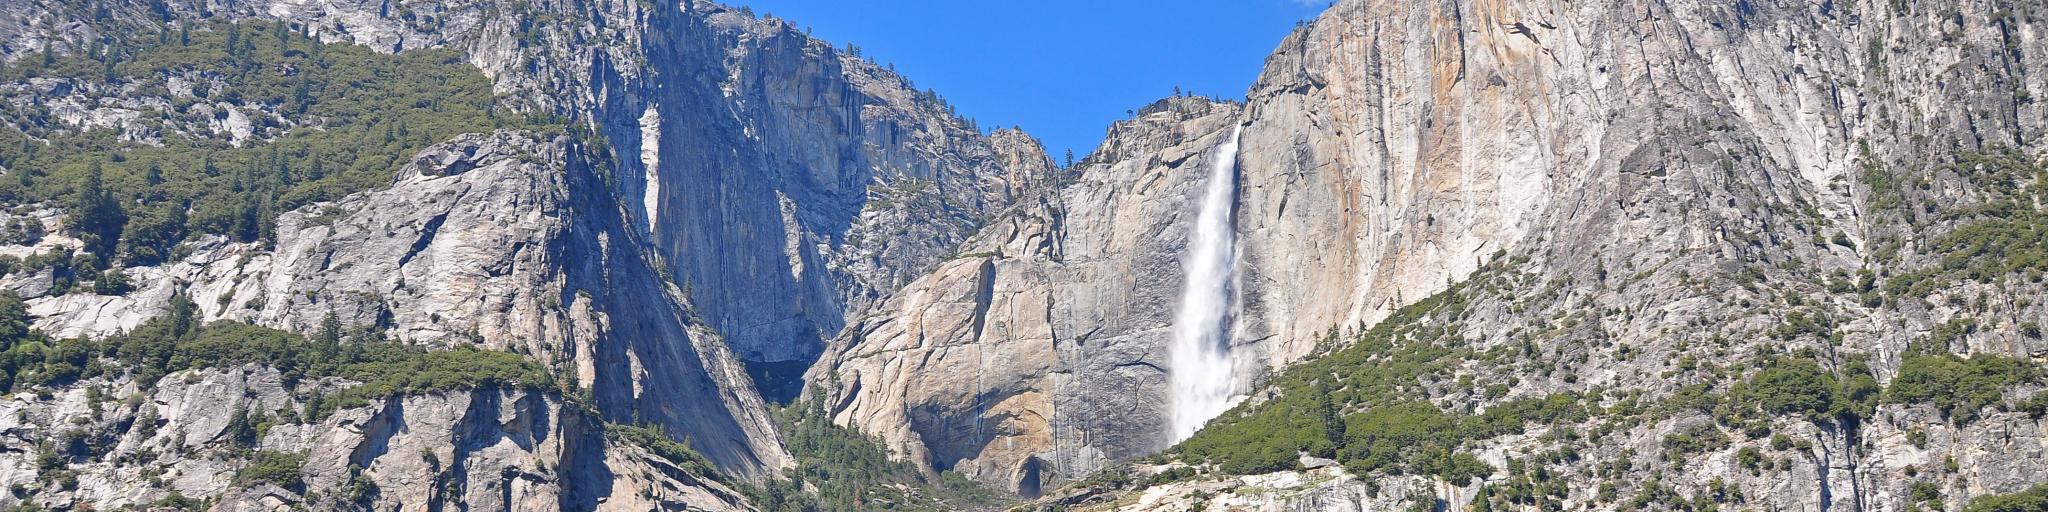 View of gushing Lower and Upper Yosemite Falls from Cook's Meadow Loop